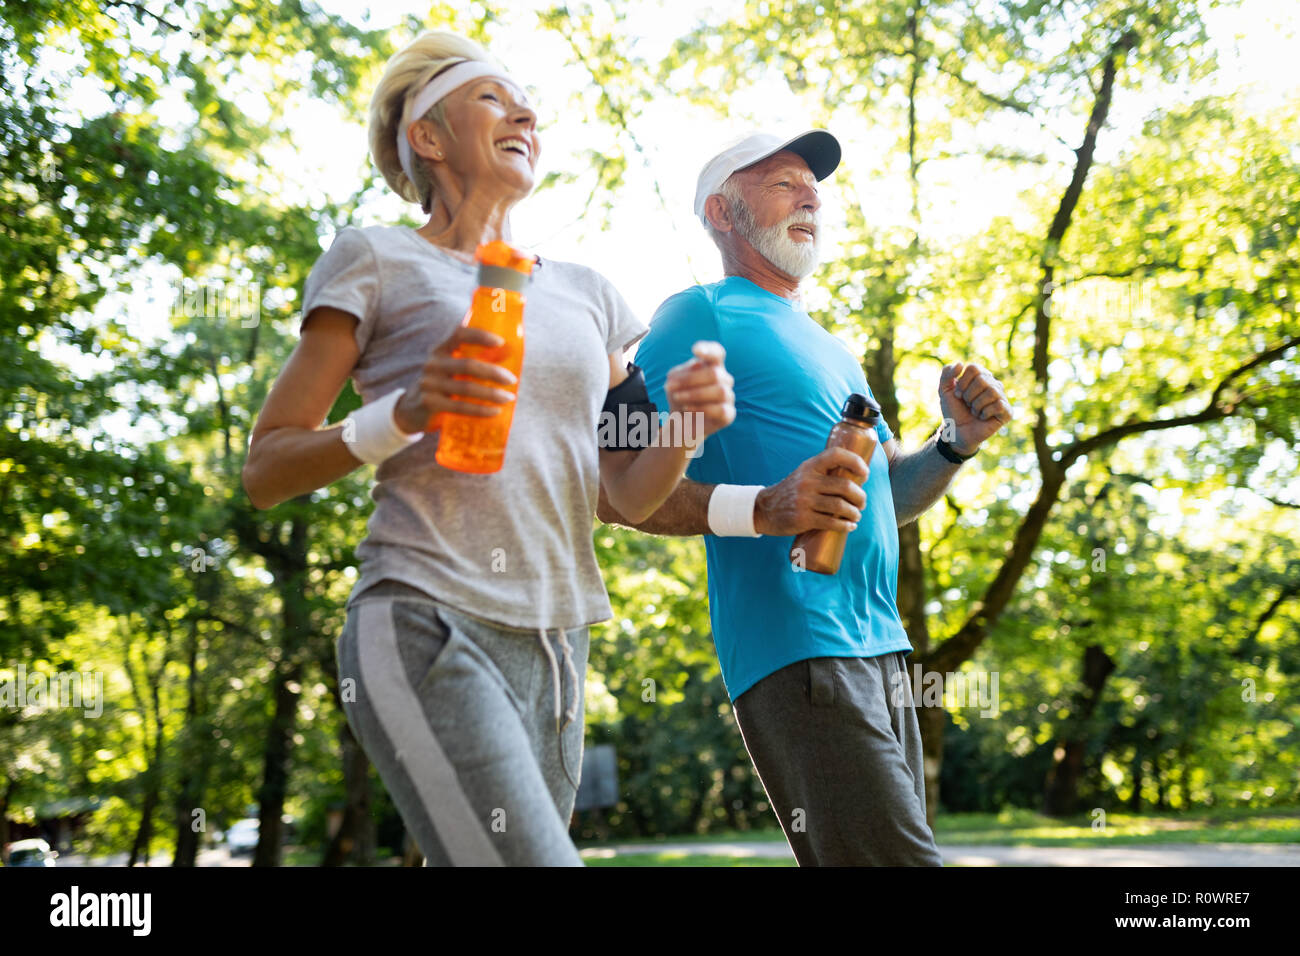 Fitness, sport, people, exercising and lifestyle concept - senior couple running Stock Photo